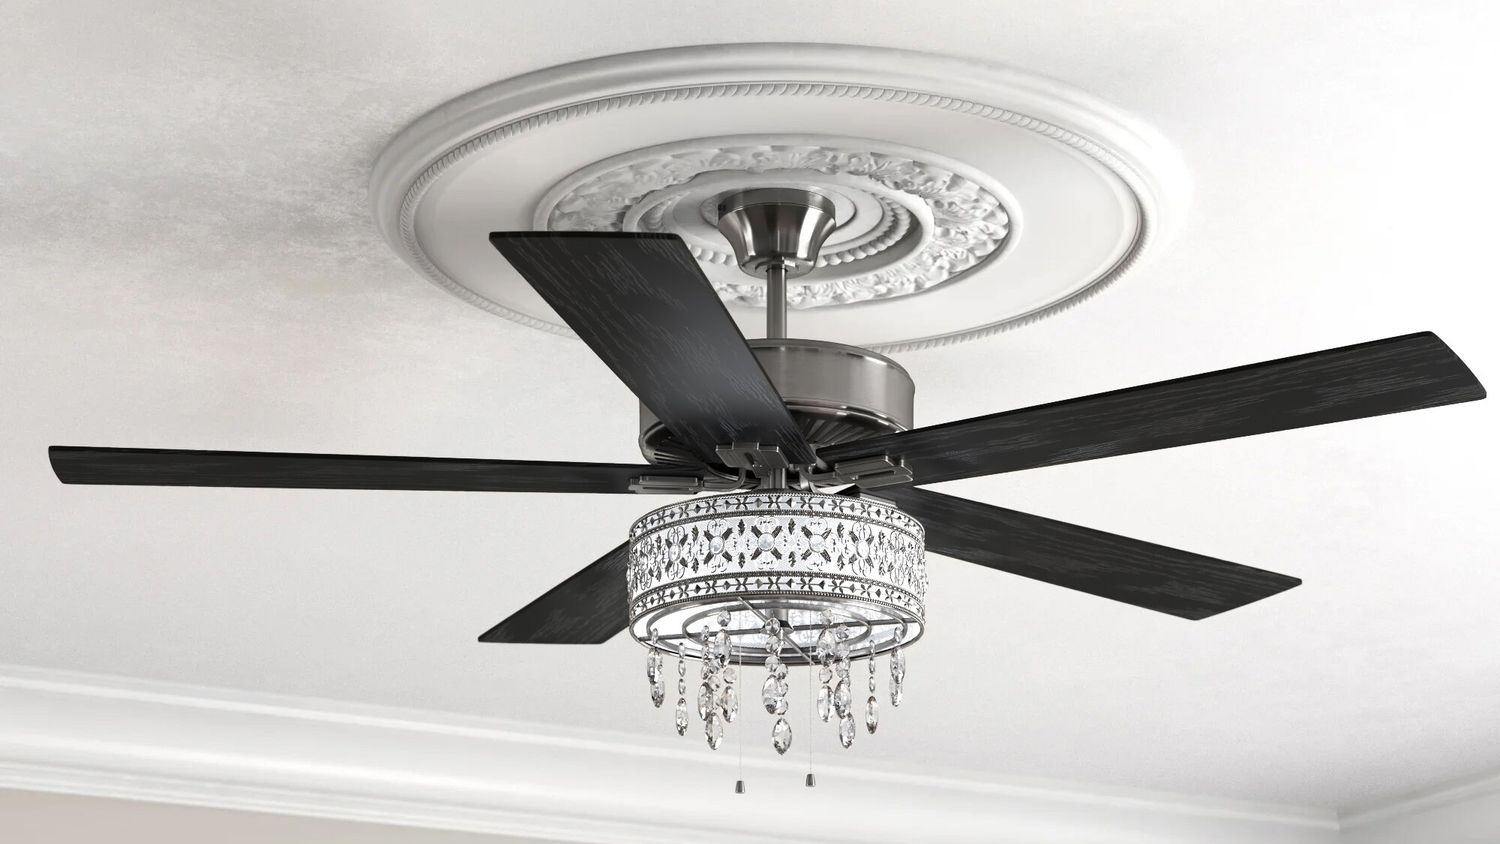 The 10 Best Ceiling Fans In 2021 According To Reviews Real Simple - What Is The Best Flush Mount Ceiling Fan